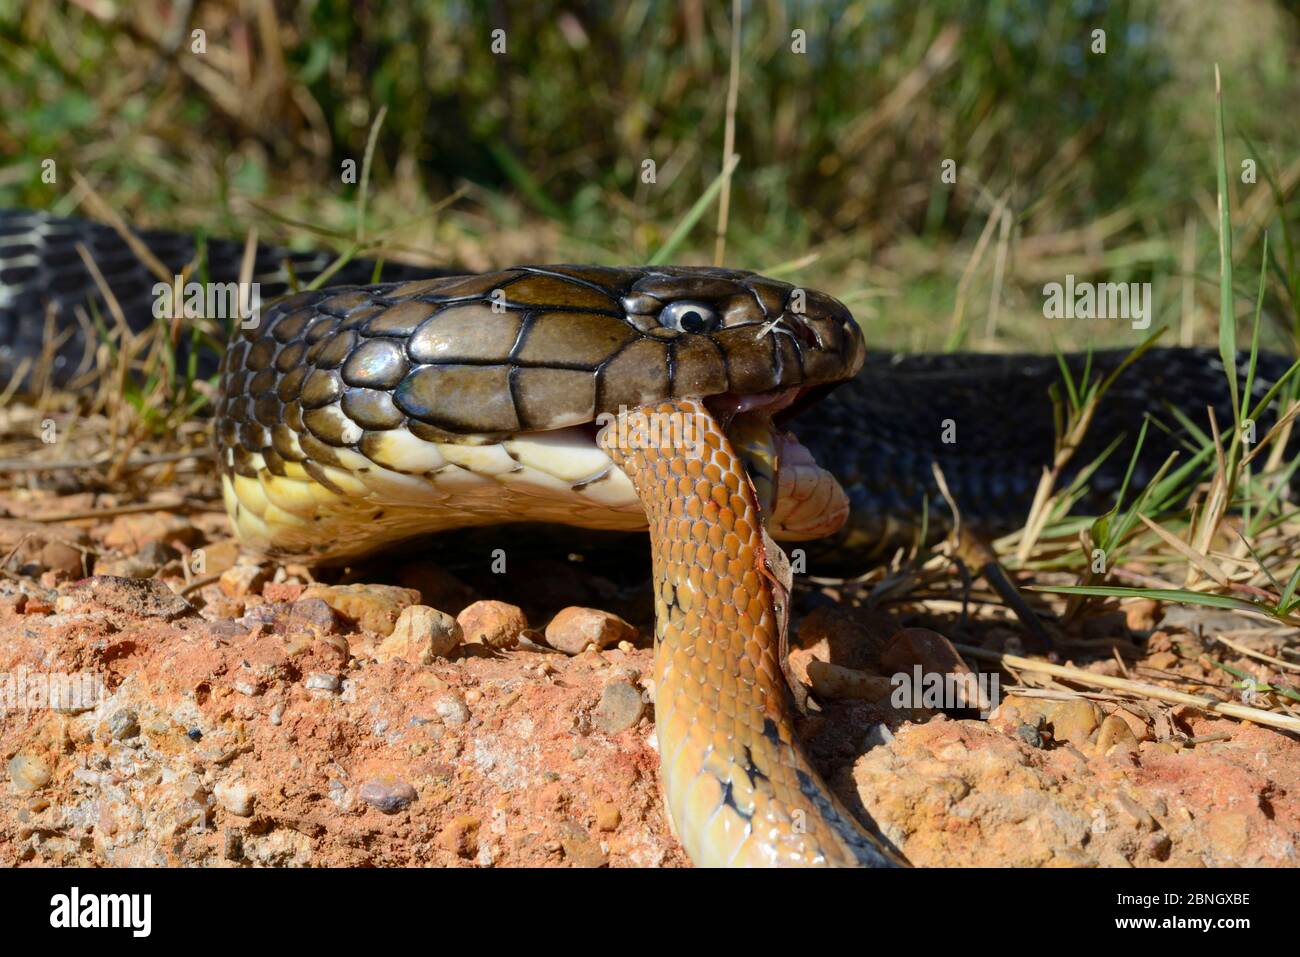 King cobra (Ophiophagus hannah) eating another snake, Thailand. Stock Photo